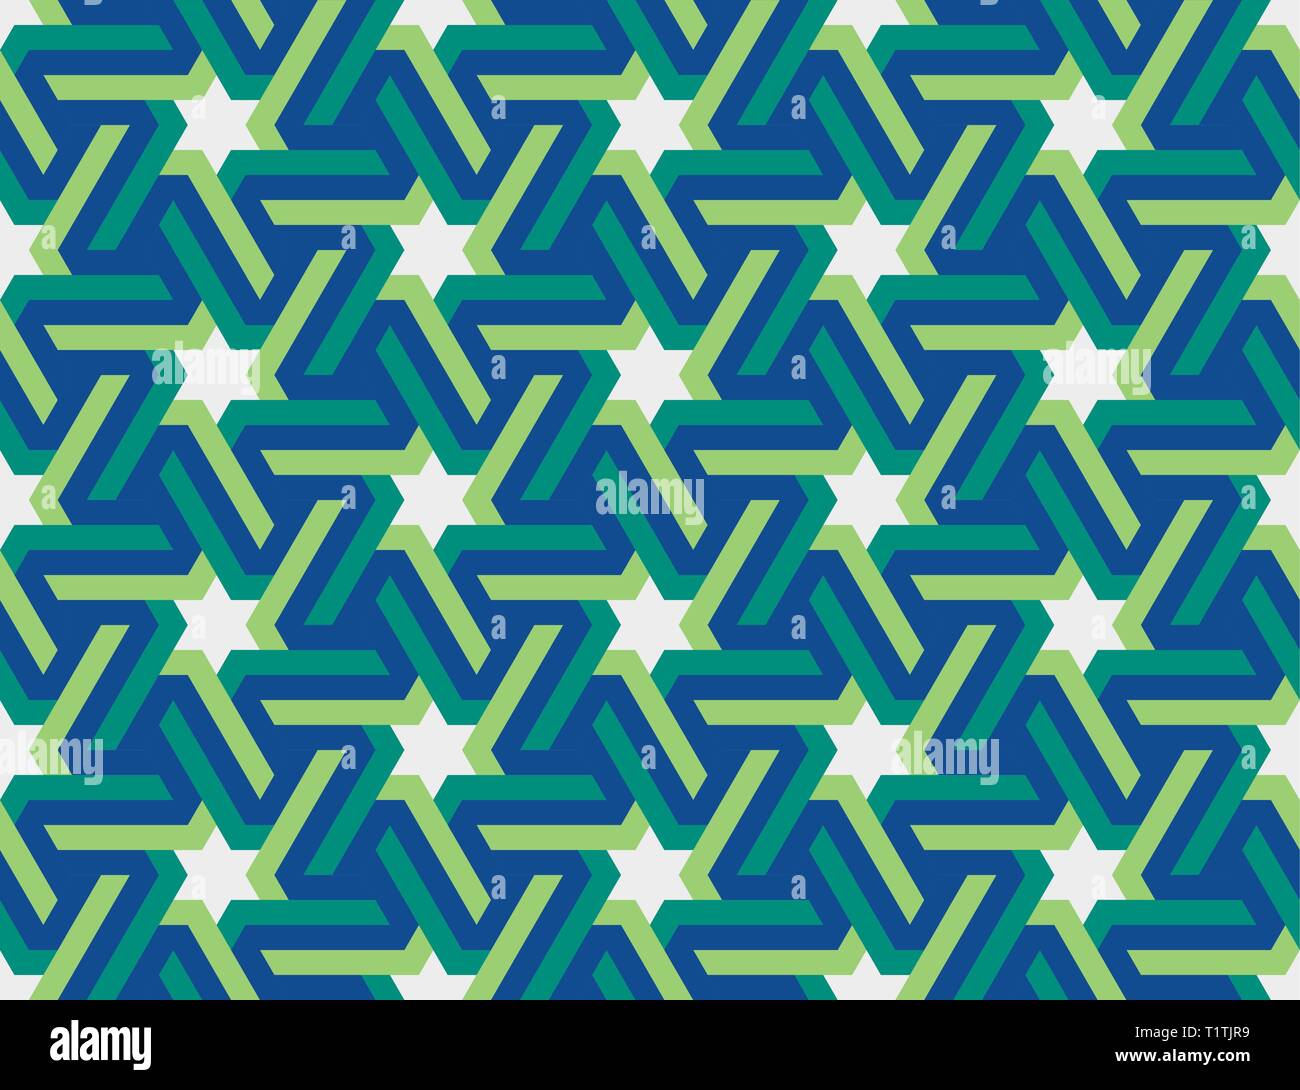 Seamless geometric Islamic ornament with hexagonal stars. Multicolored Arabic ornament. Pattern of the countries of the Arabian Peninsula and the Midd Stock Vector